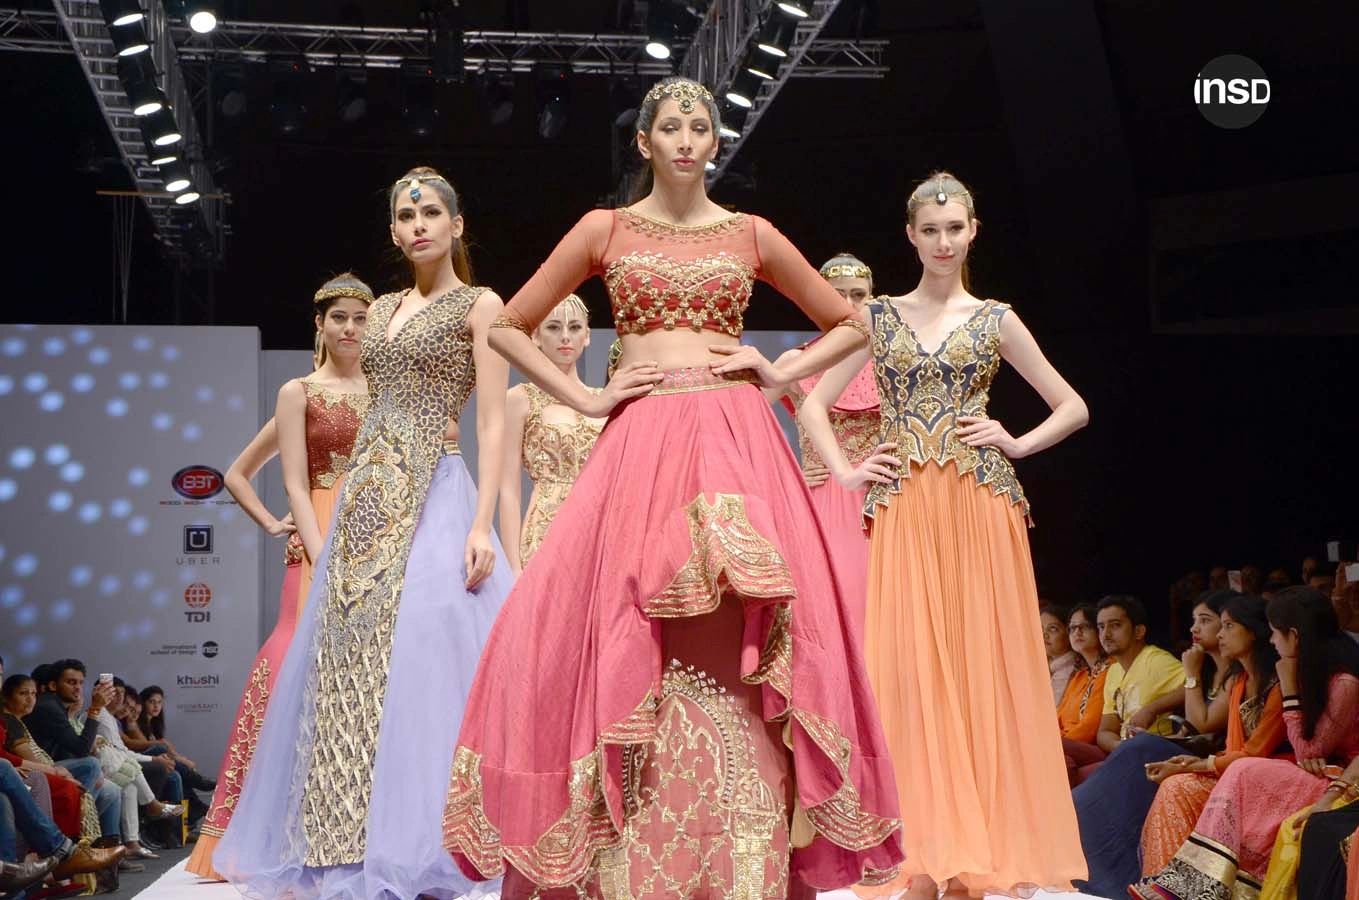 International Fashion show organised by Insd Students